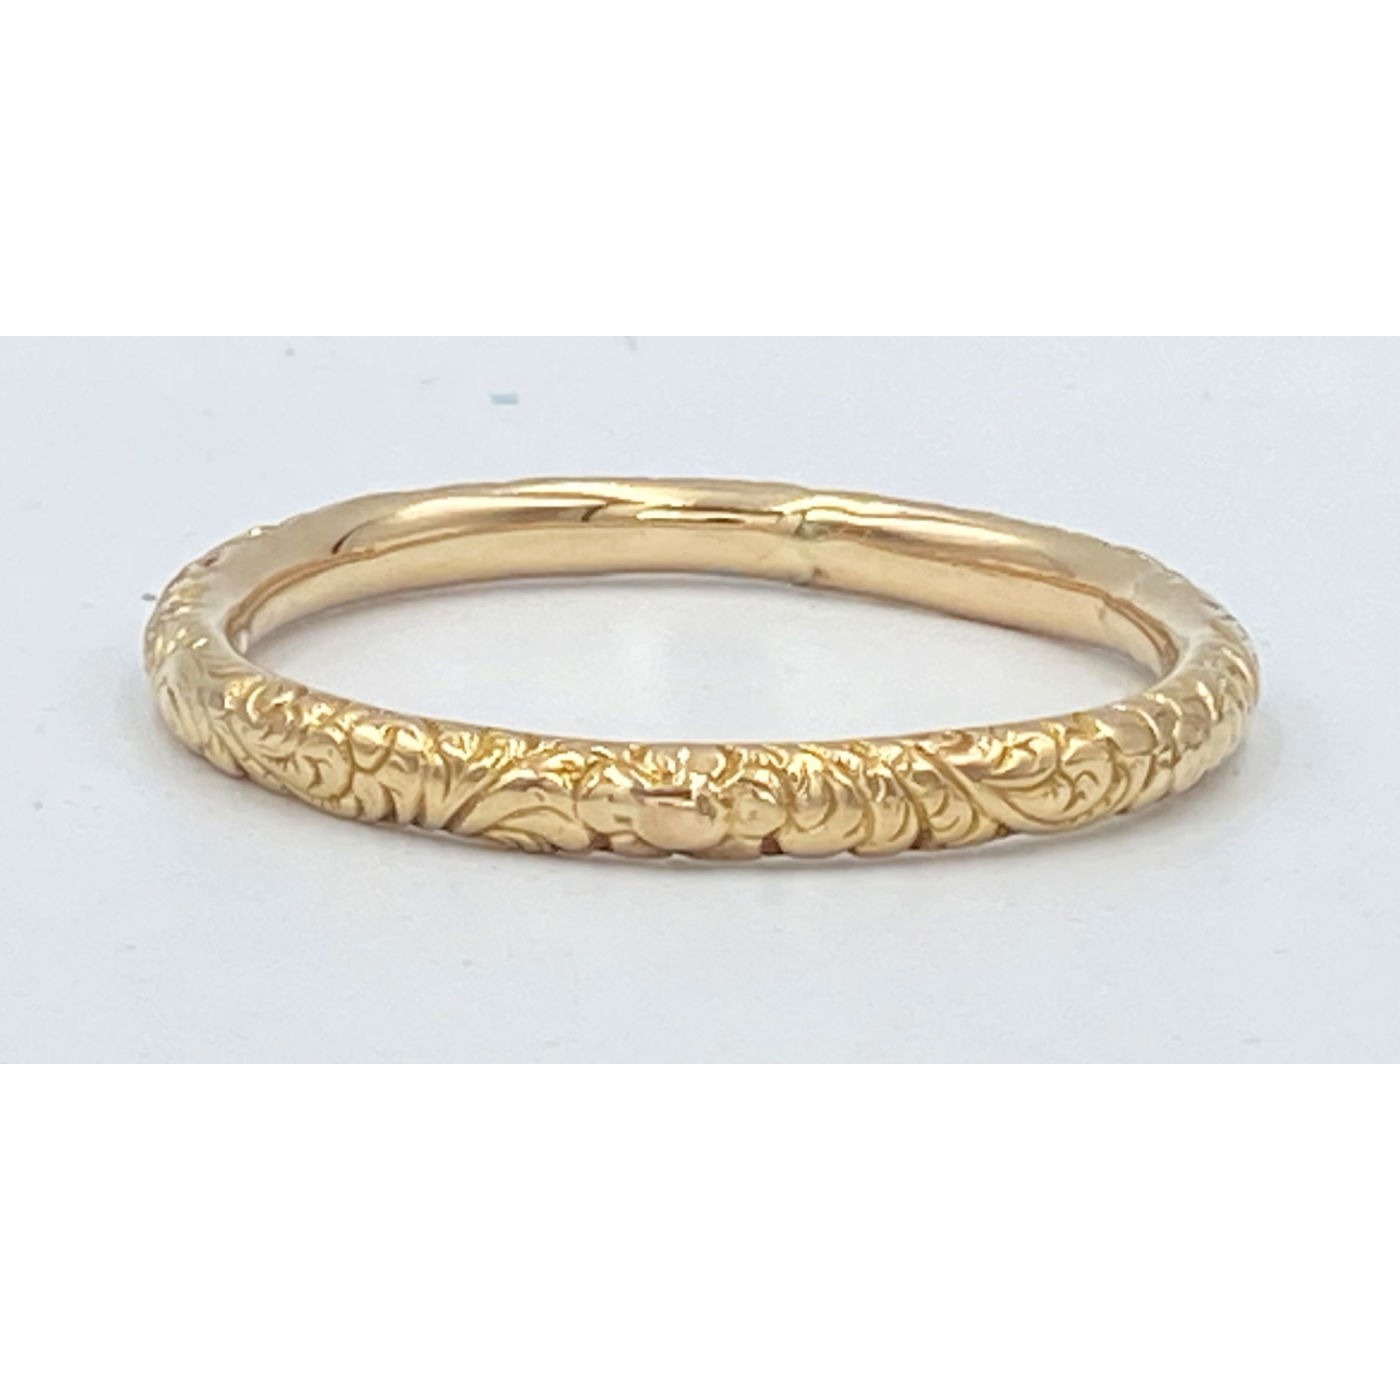 Deeply Engraved 14kt GOLD Bangle - Gorgeous